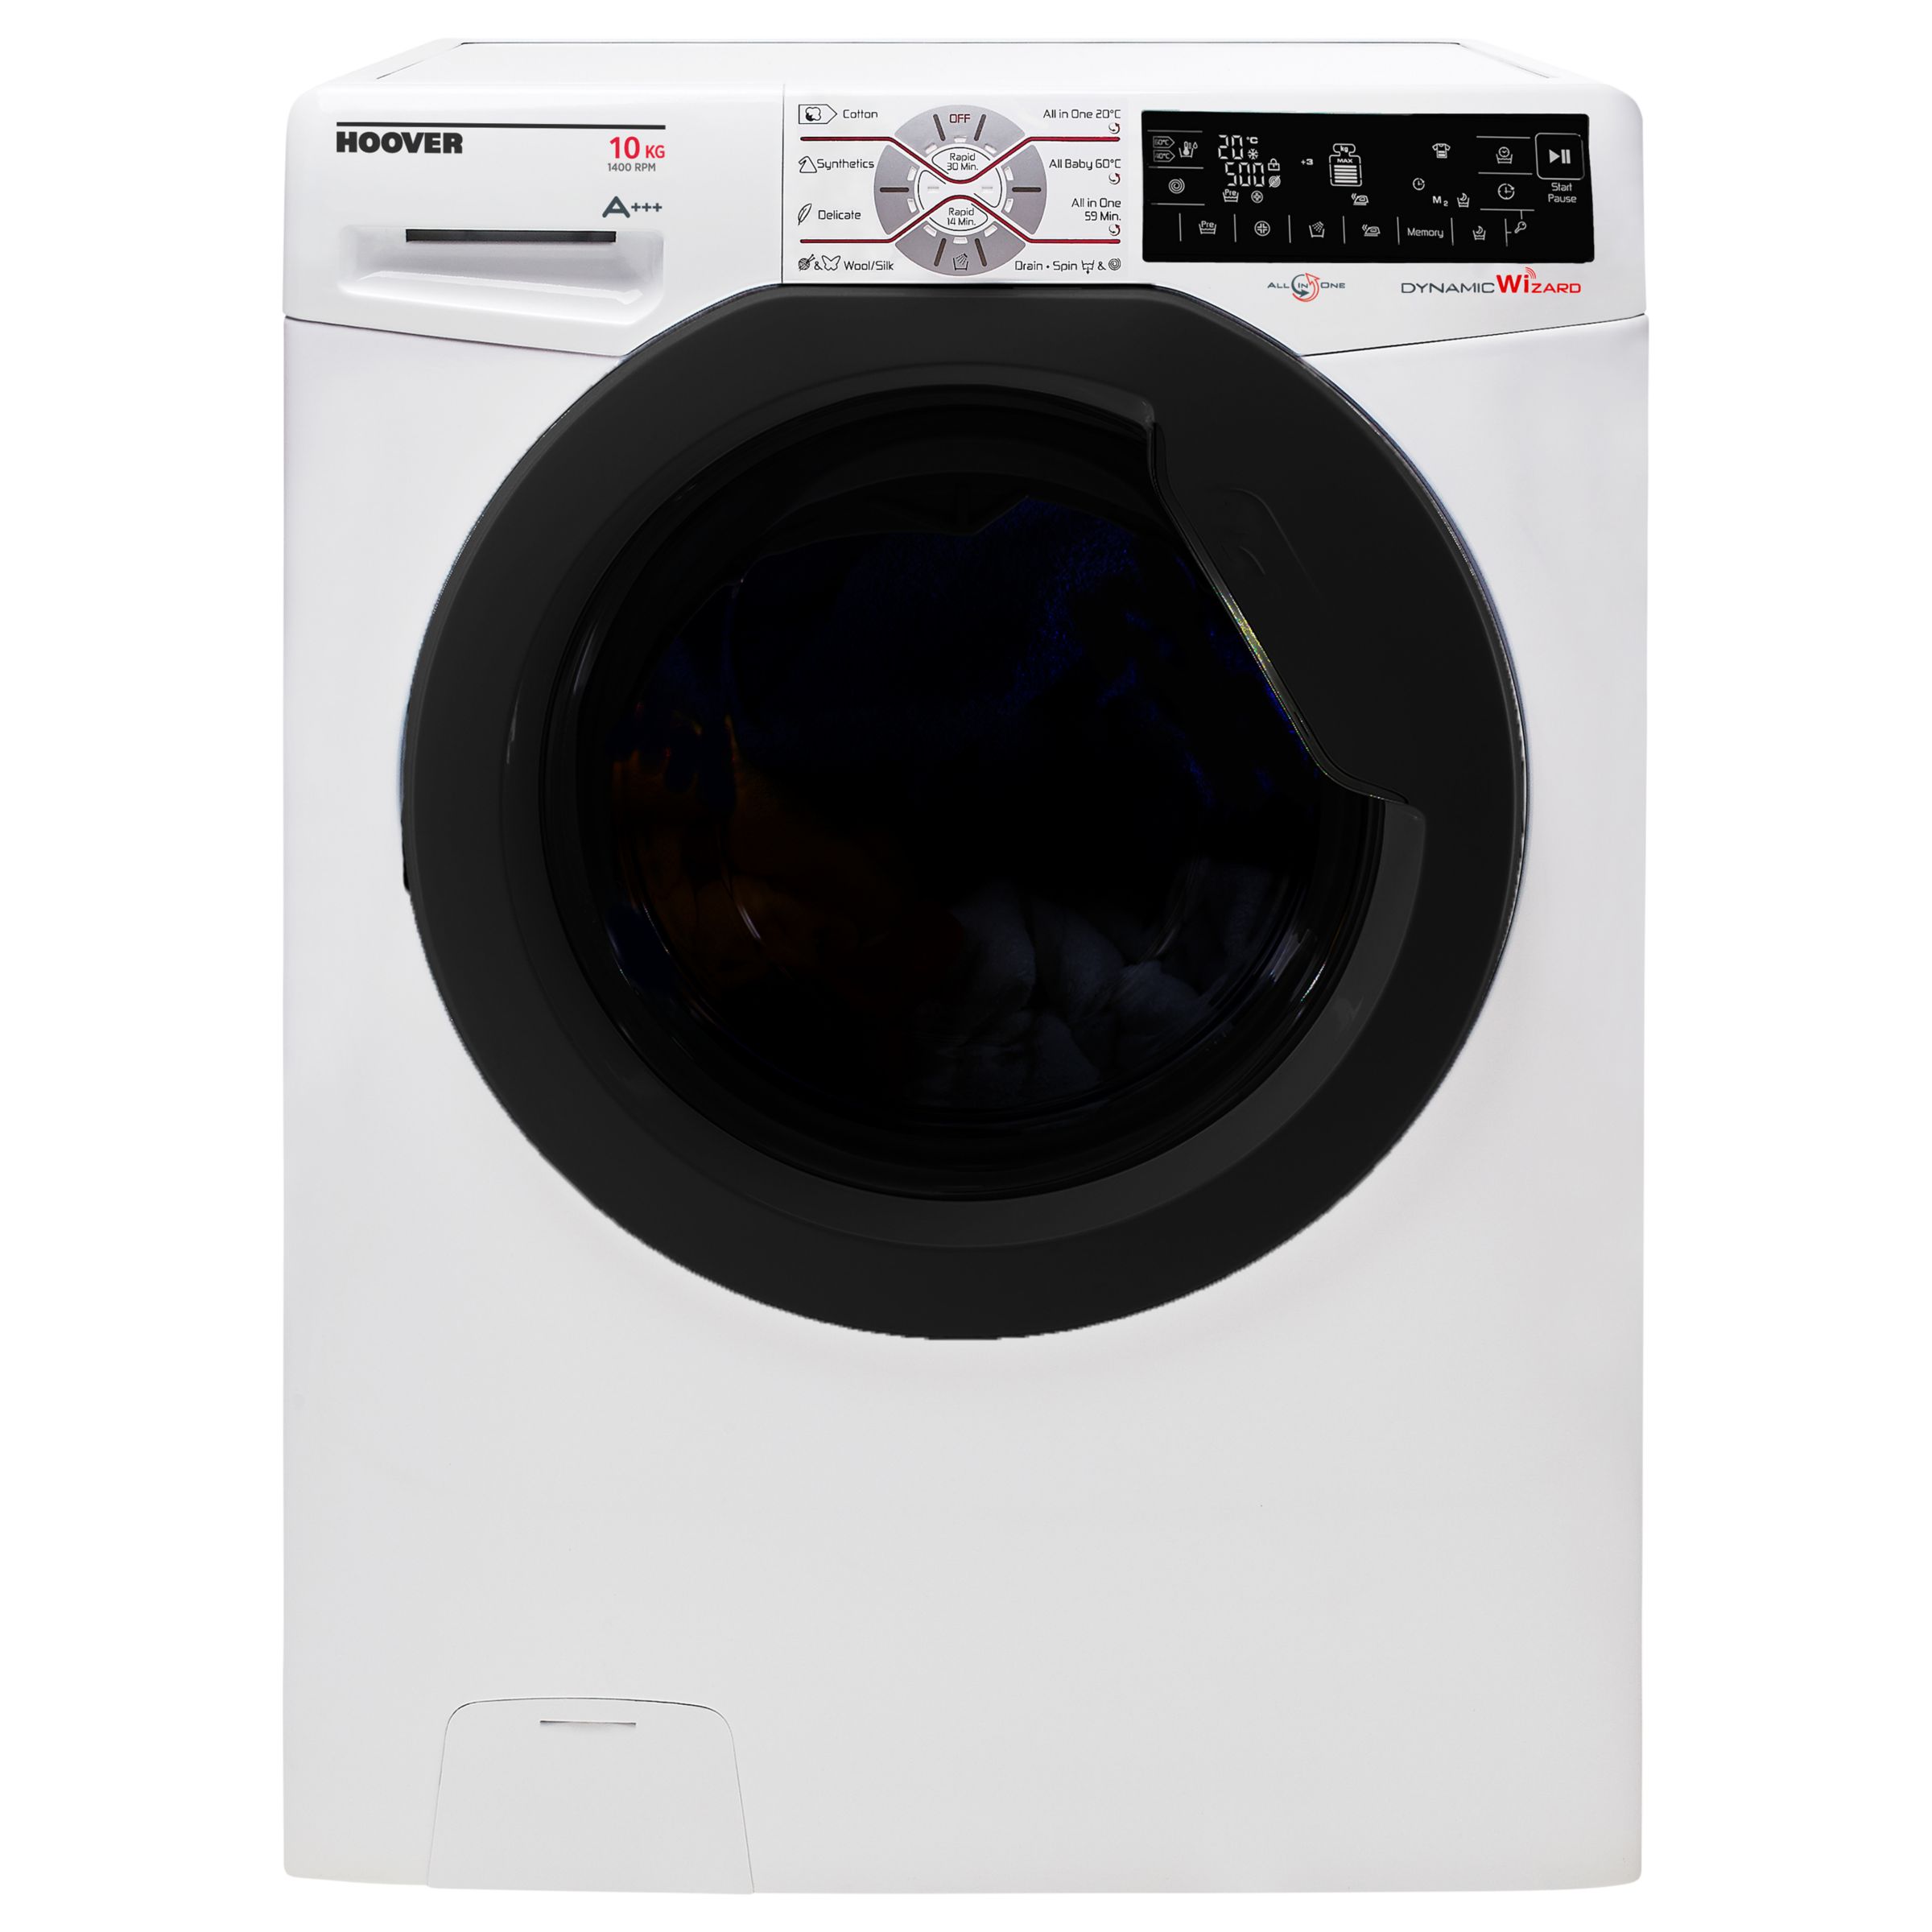 Hoover DWFT410AH3 Freestanding Washing Machine, 10kg Load, A+++ Energy Rating, 1400rpm Spin, White